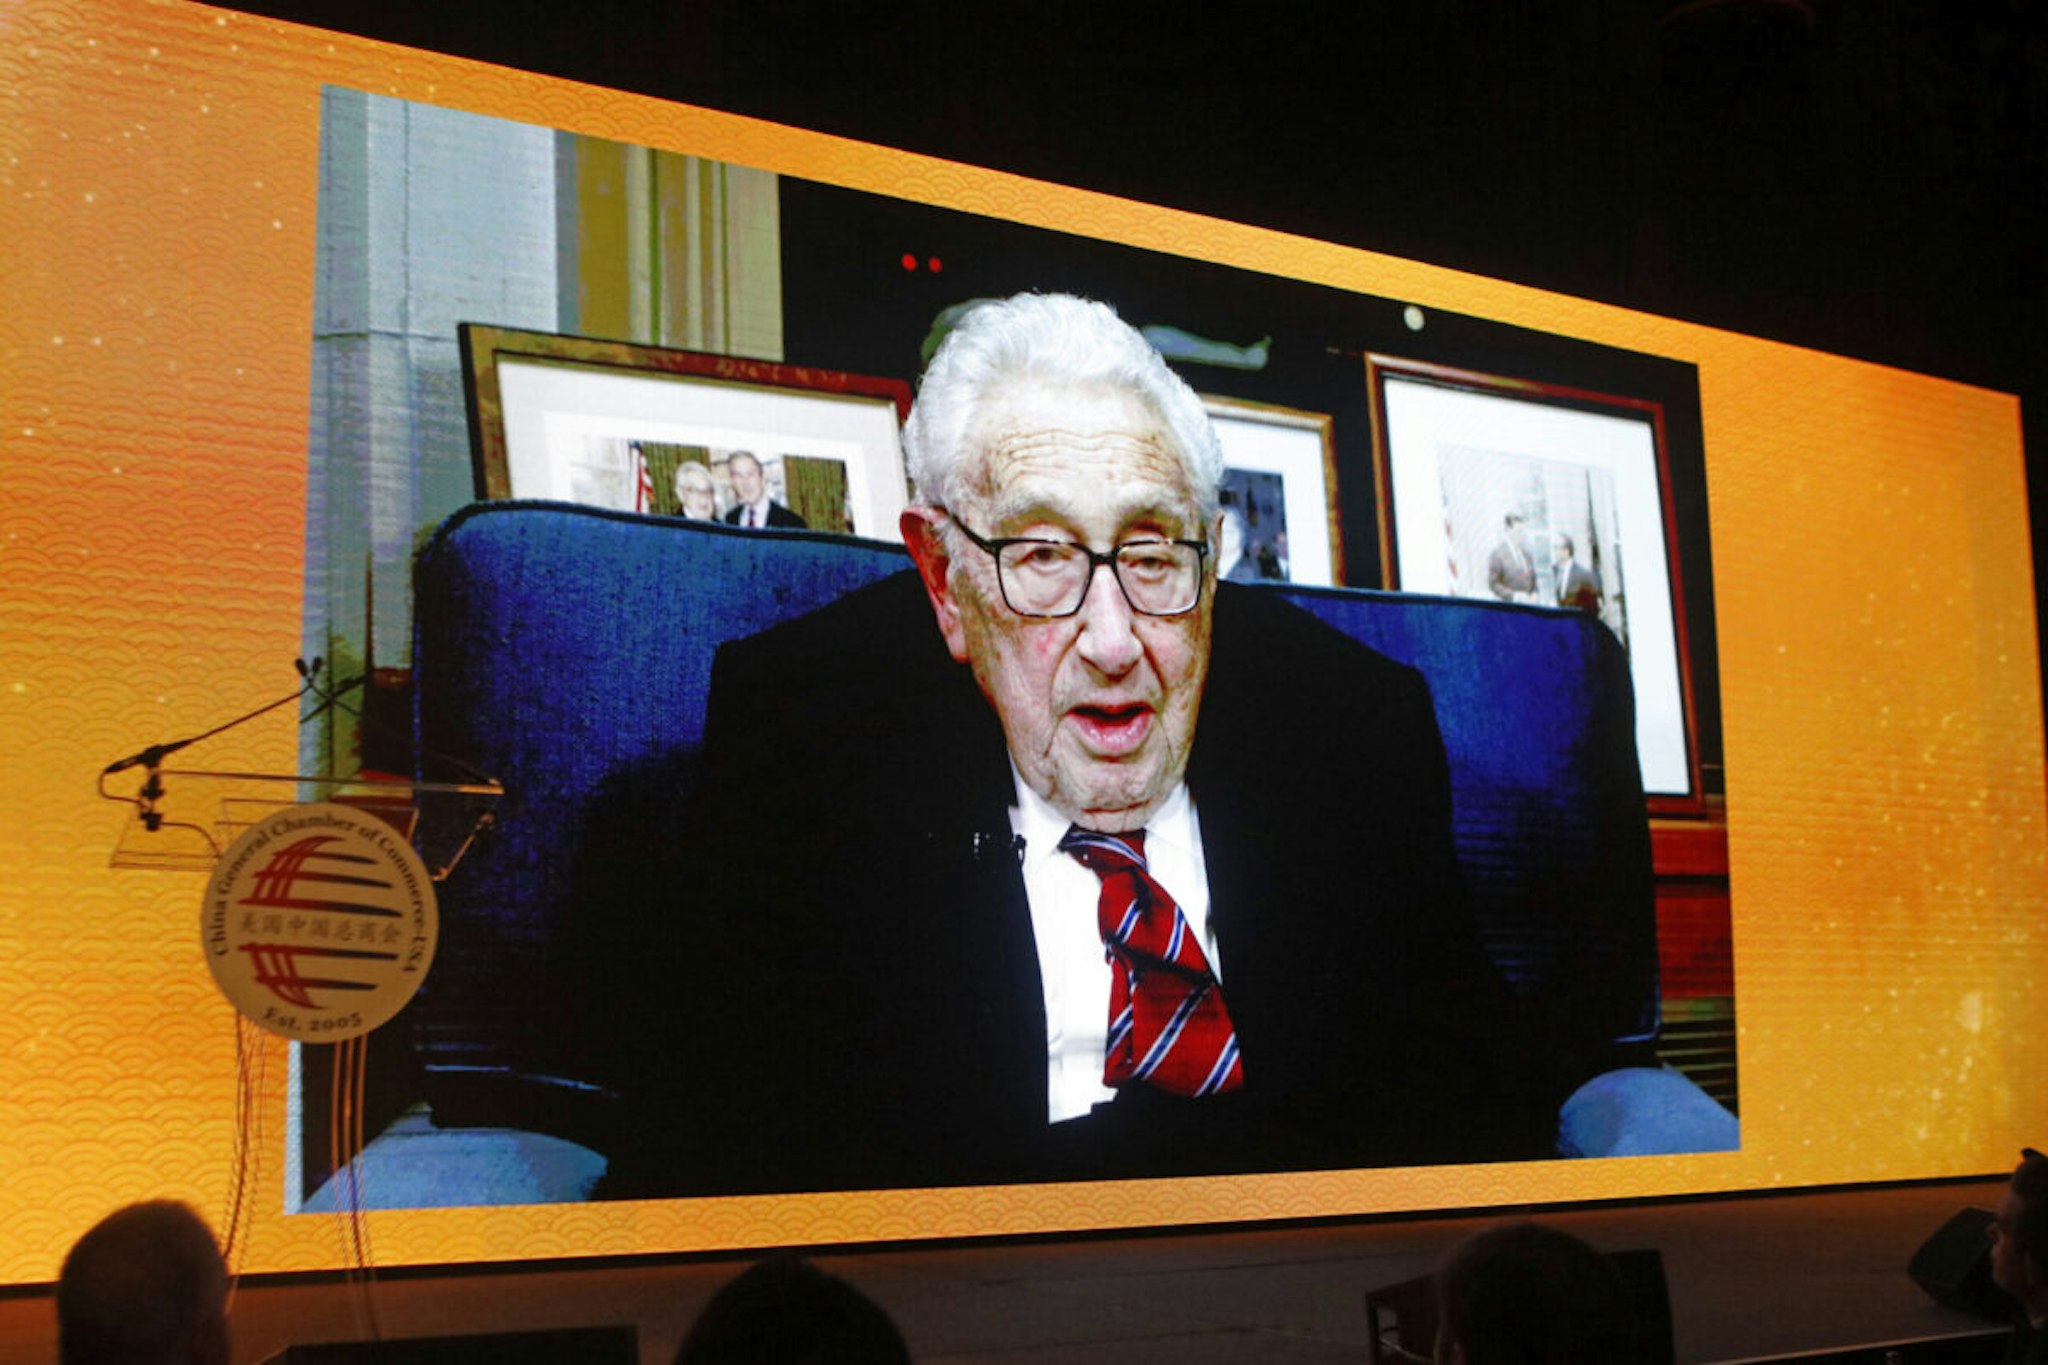 Former US Secretary of State Henry Kissinger speaks via video link during 2023 Lunar New Year of the Rabbit Gala on January 18, 2023 in New York City.